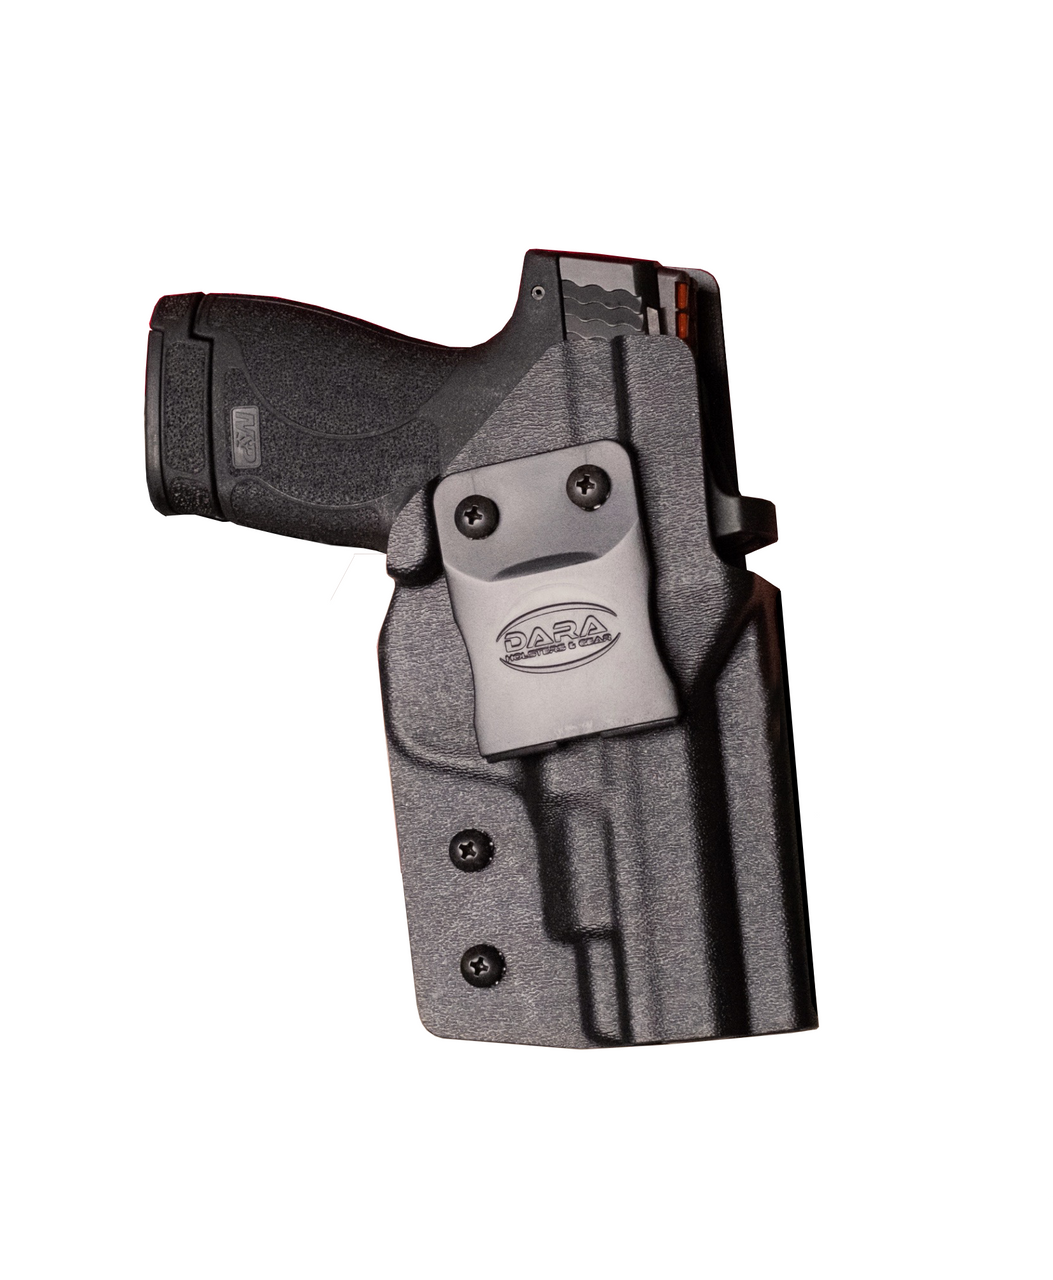 Professional™ Inside Waistband Holster - Comfortable and Secure